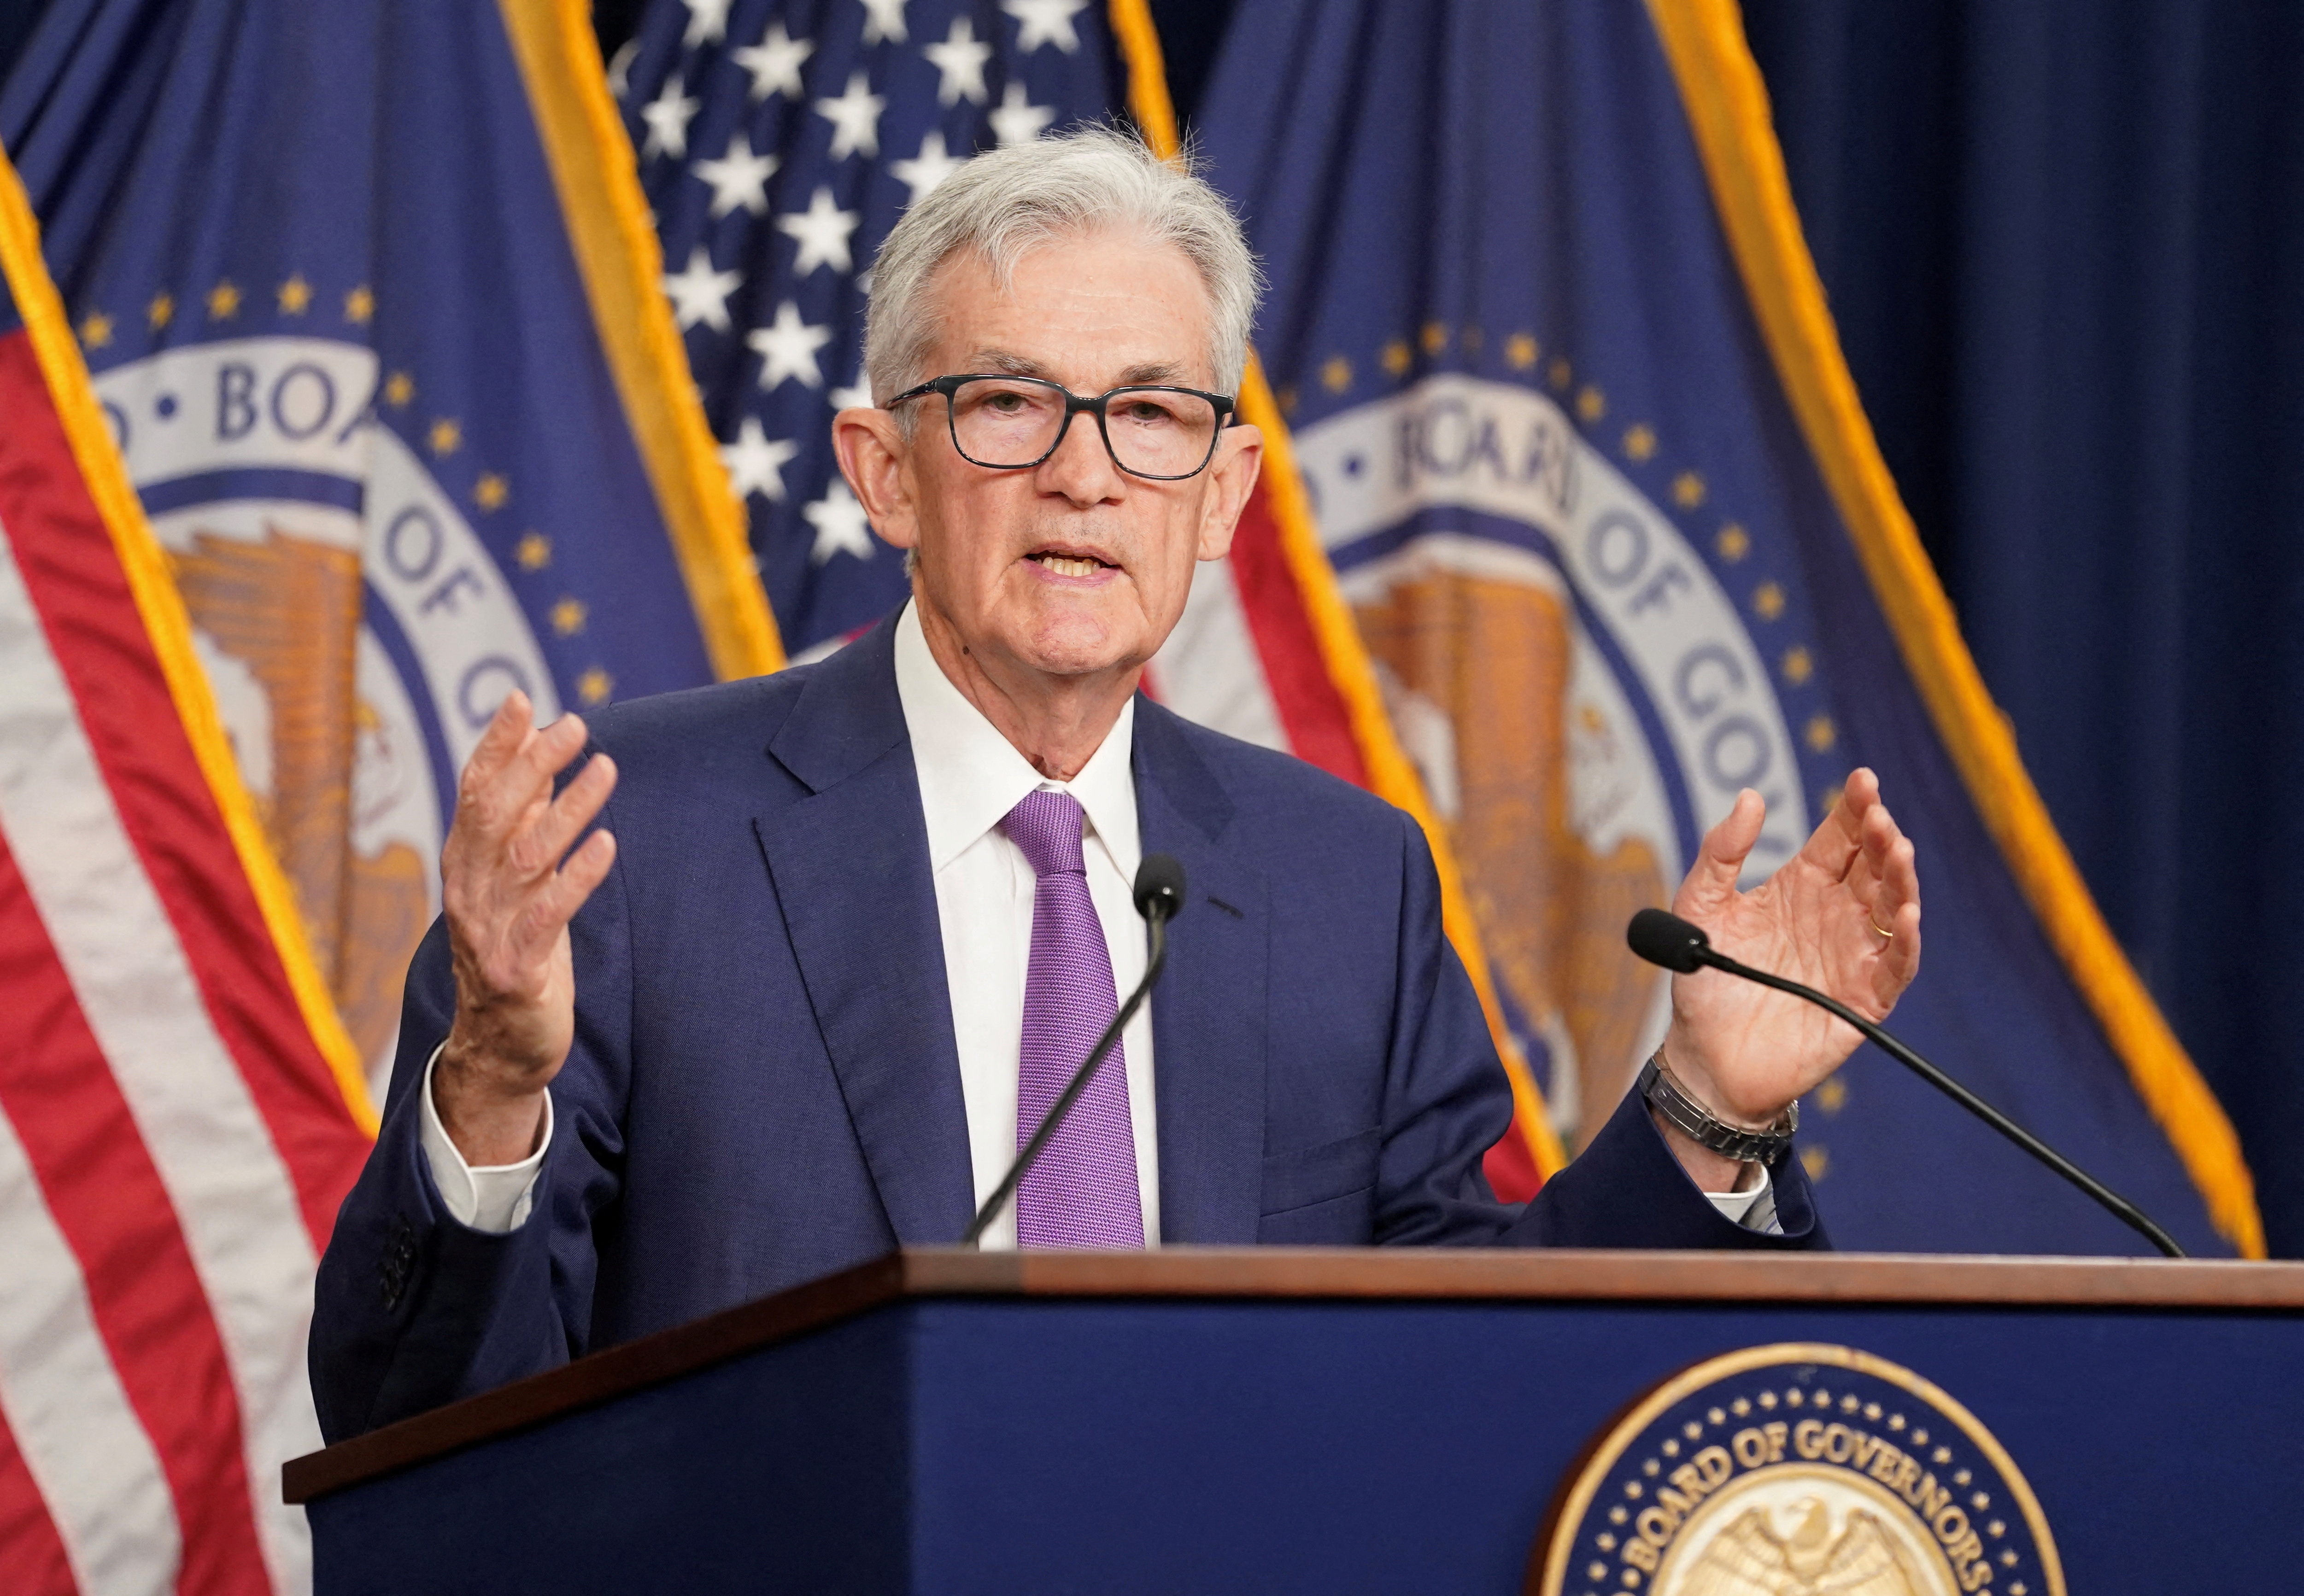 Fed Chair Powell speaks at a press conference in Washington